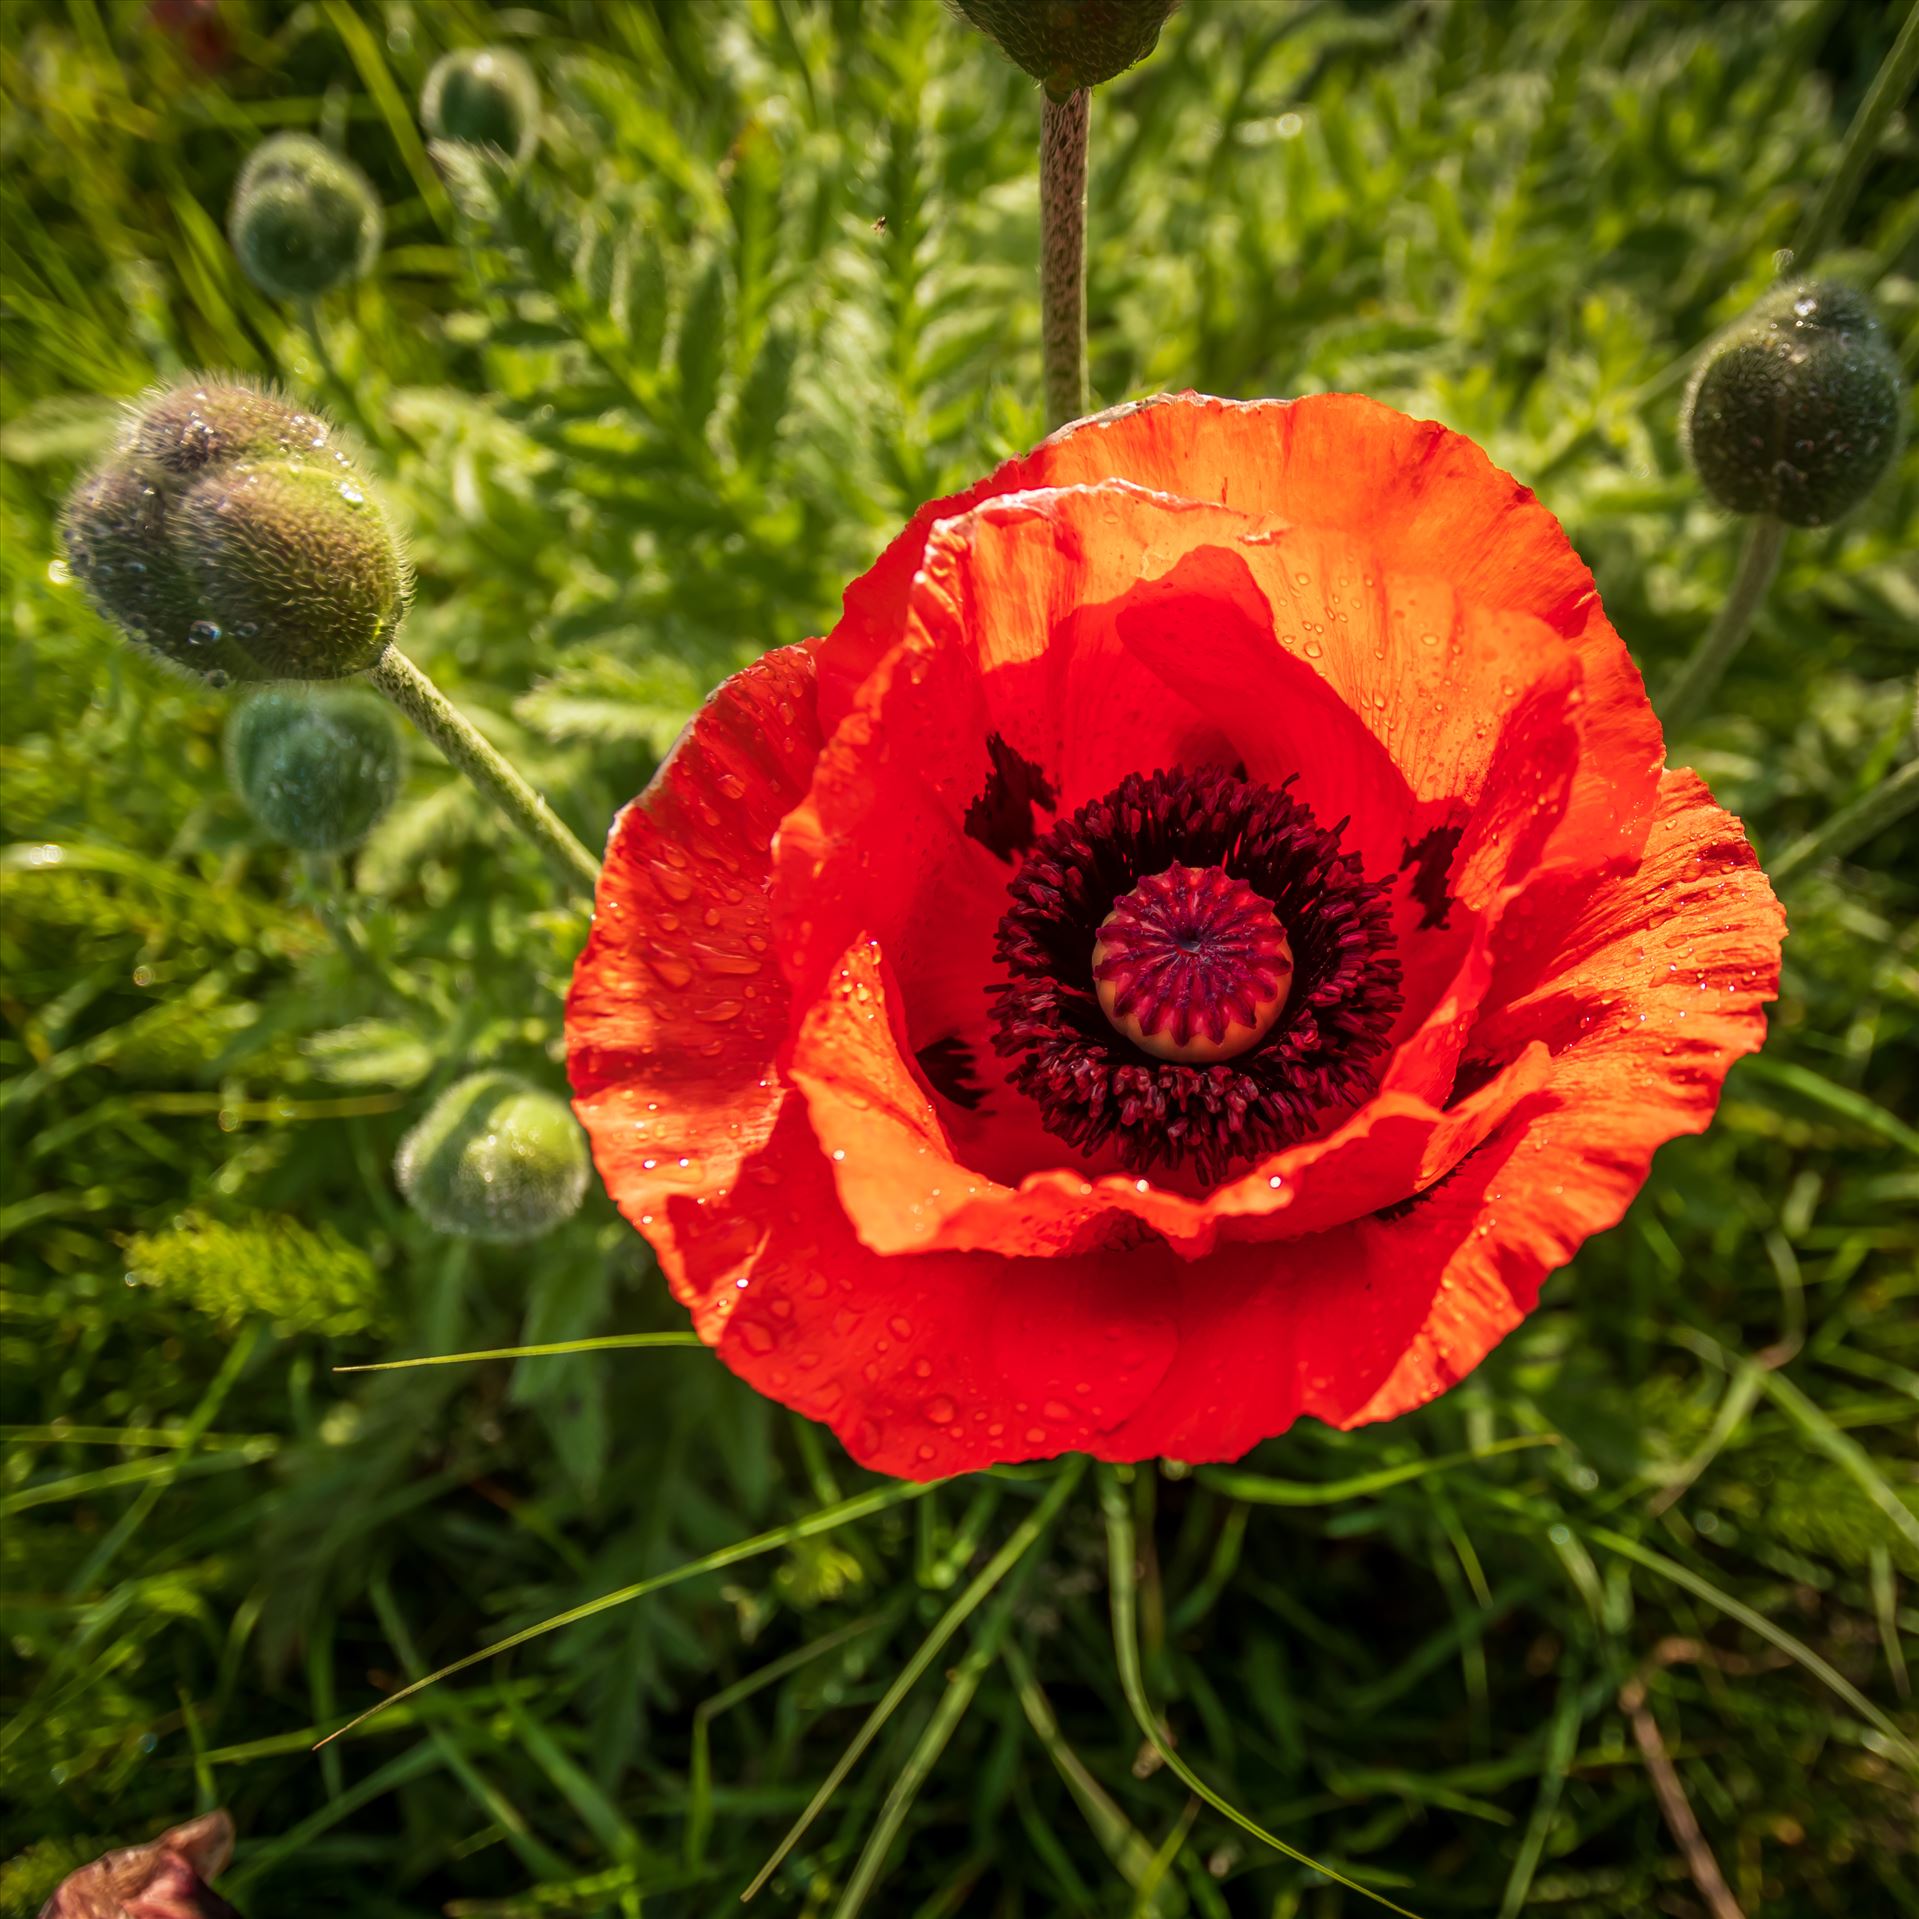 A single poppy -  by philreay